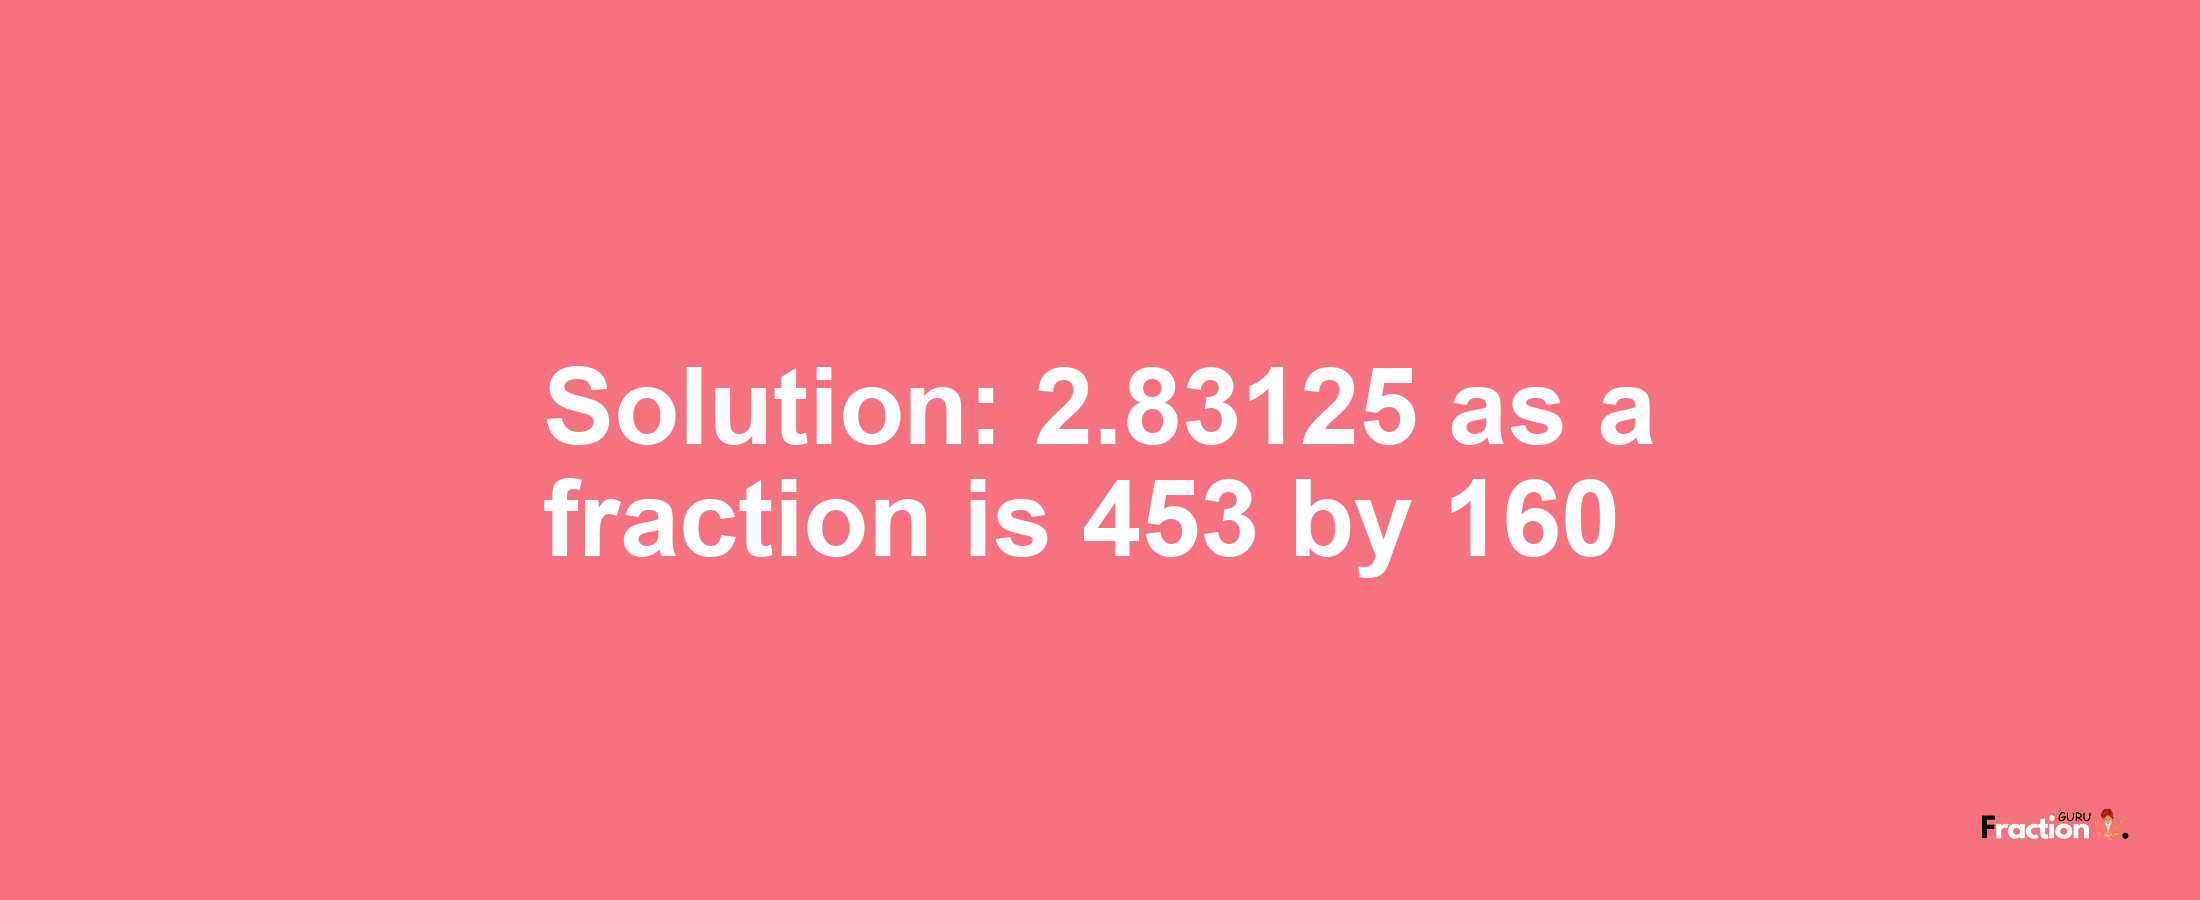 Solution:2.83125 as a fraction is 453/160